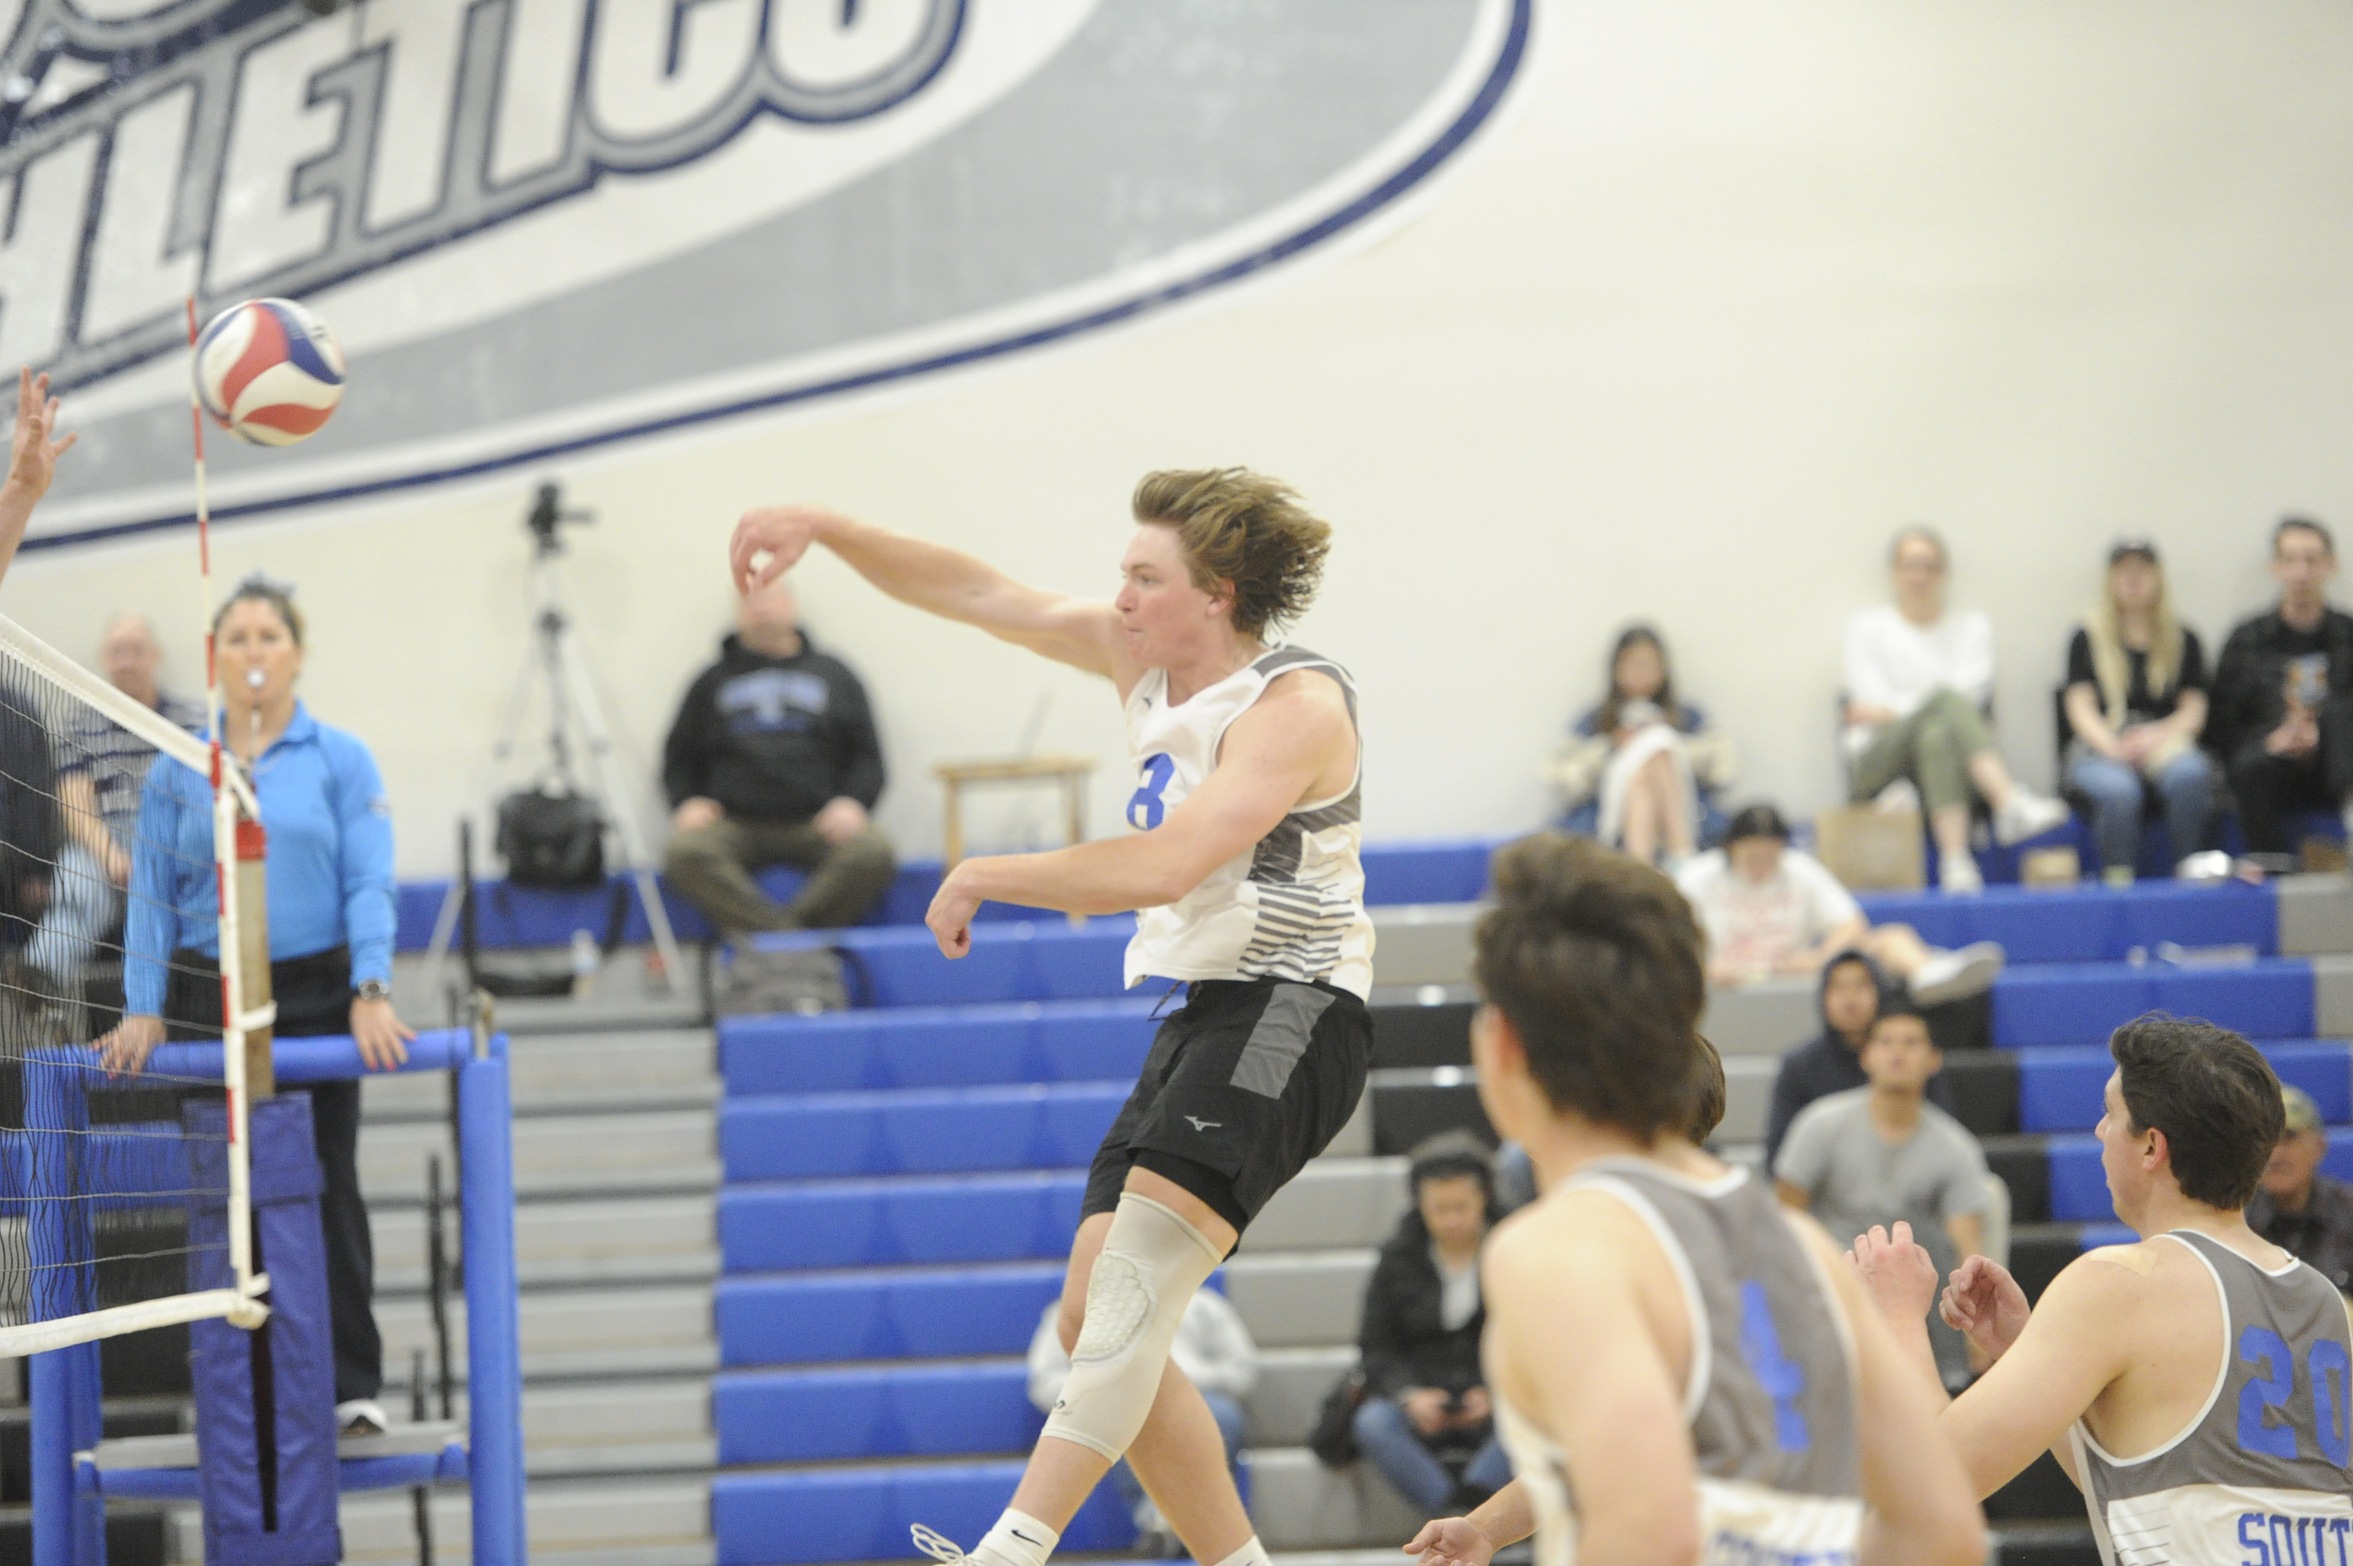 SMCC Men's Volleyball Continues Ascent in Second Season